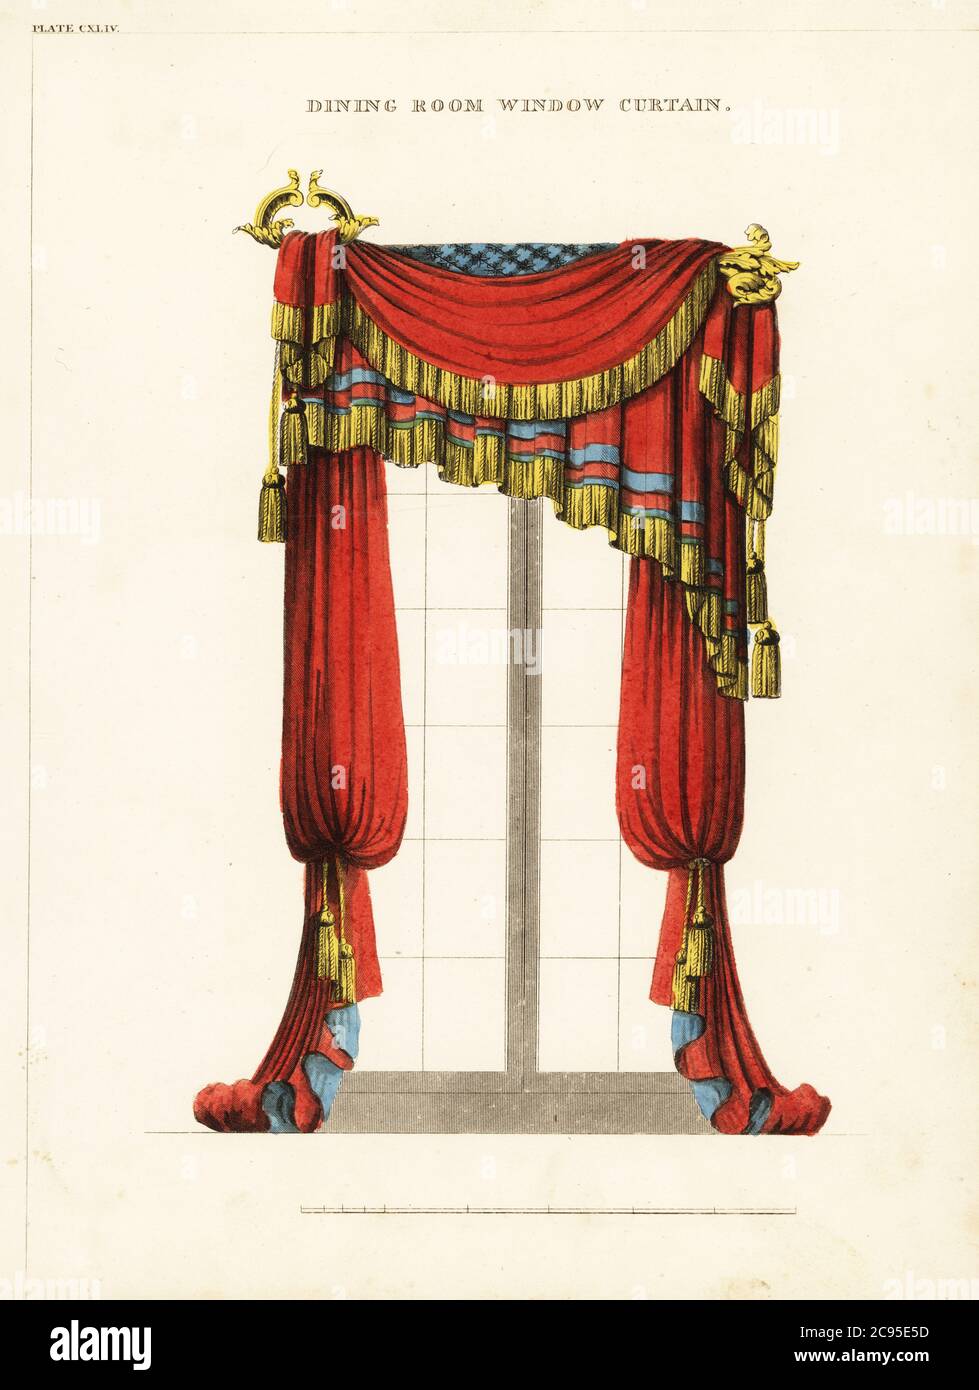 Dining room window curtains, Regency style. Fringed and tasseled drapes hung over ornate gilt curtain rods, with blue-lined curtains below. Handcoloured copperplate engraving from George Smith’s The Cabinet-Maker and Upholsterer’s Guide, Jones and Co., London, 1828. George Smith was upholsterer and furniture draughtsman to his Majesty (the Prince of Wales, later King George IV), circa 1786-1826. Stock Photo